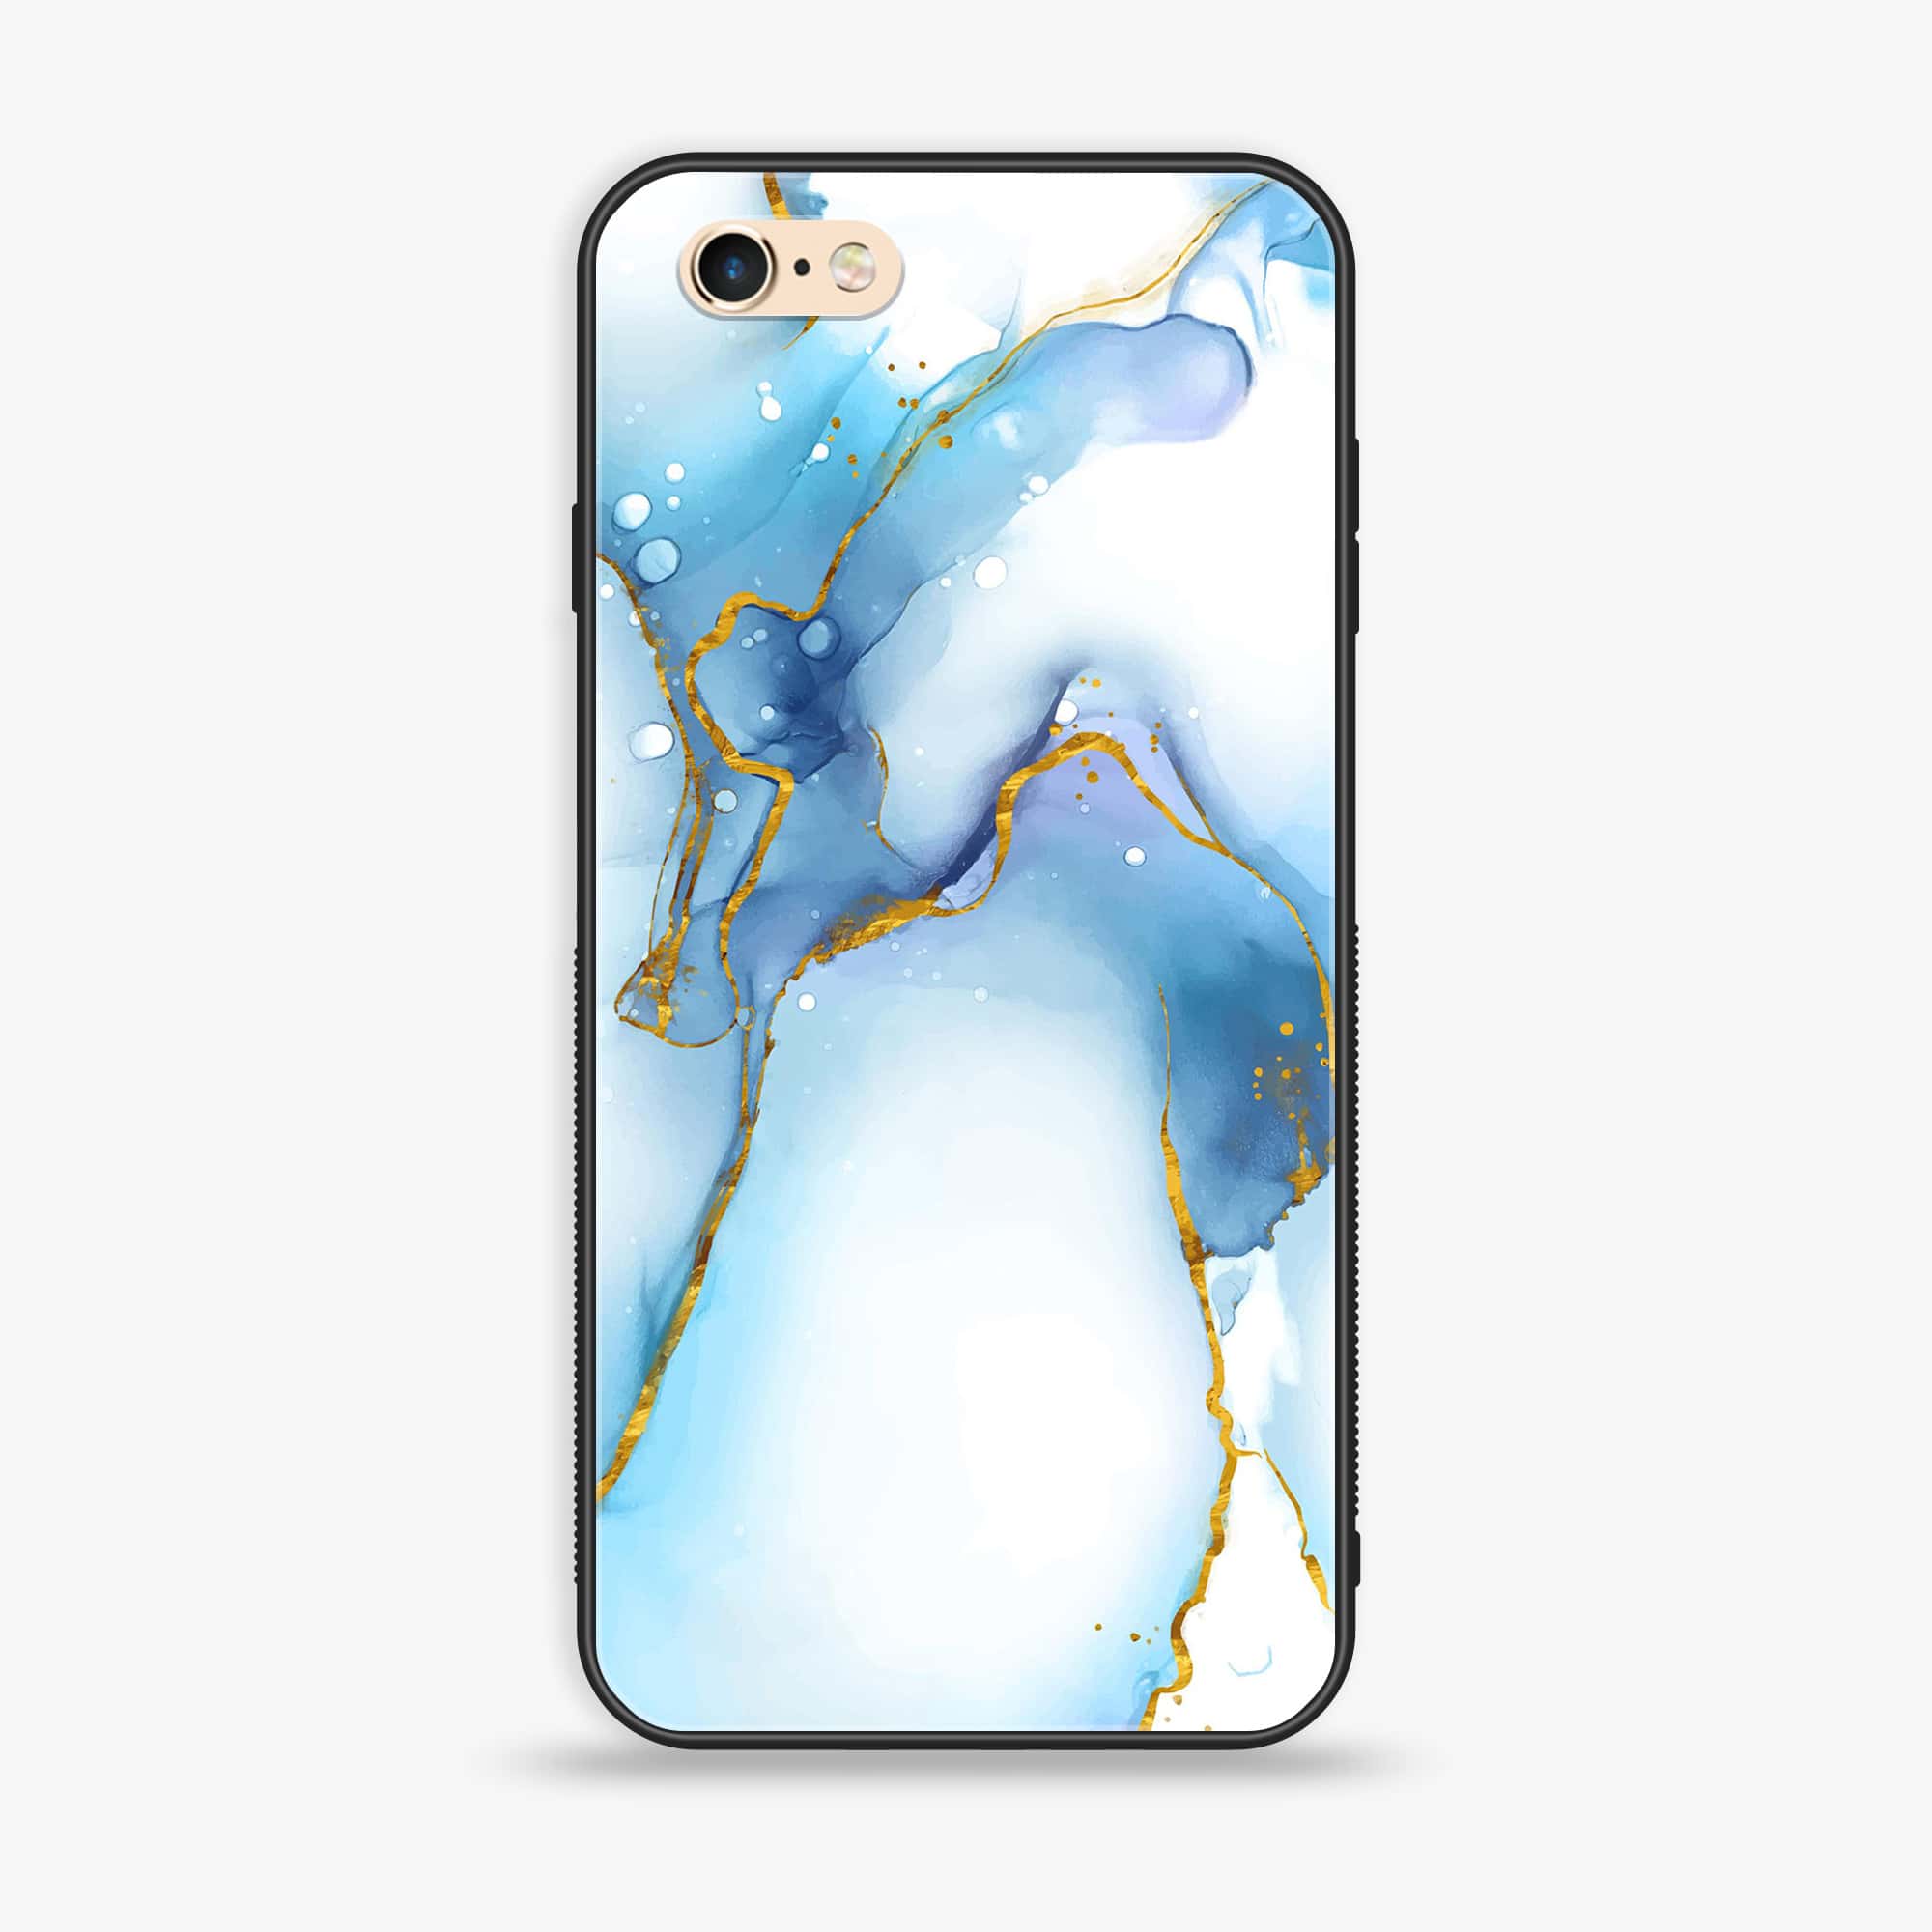 iPhone 6 - Blue Marble Series V 2.0 - Premium Printed Glass soft Bumper shock Proof Case